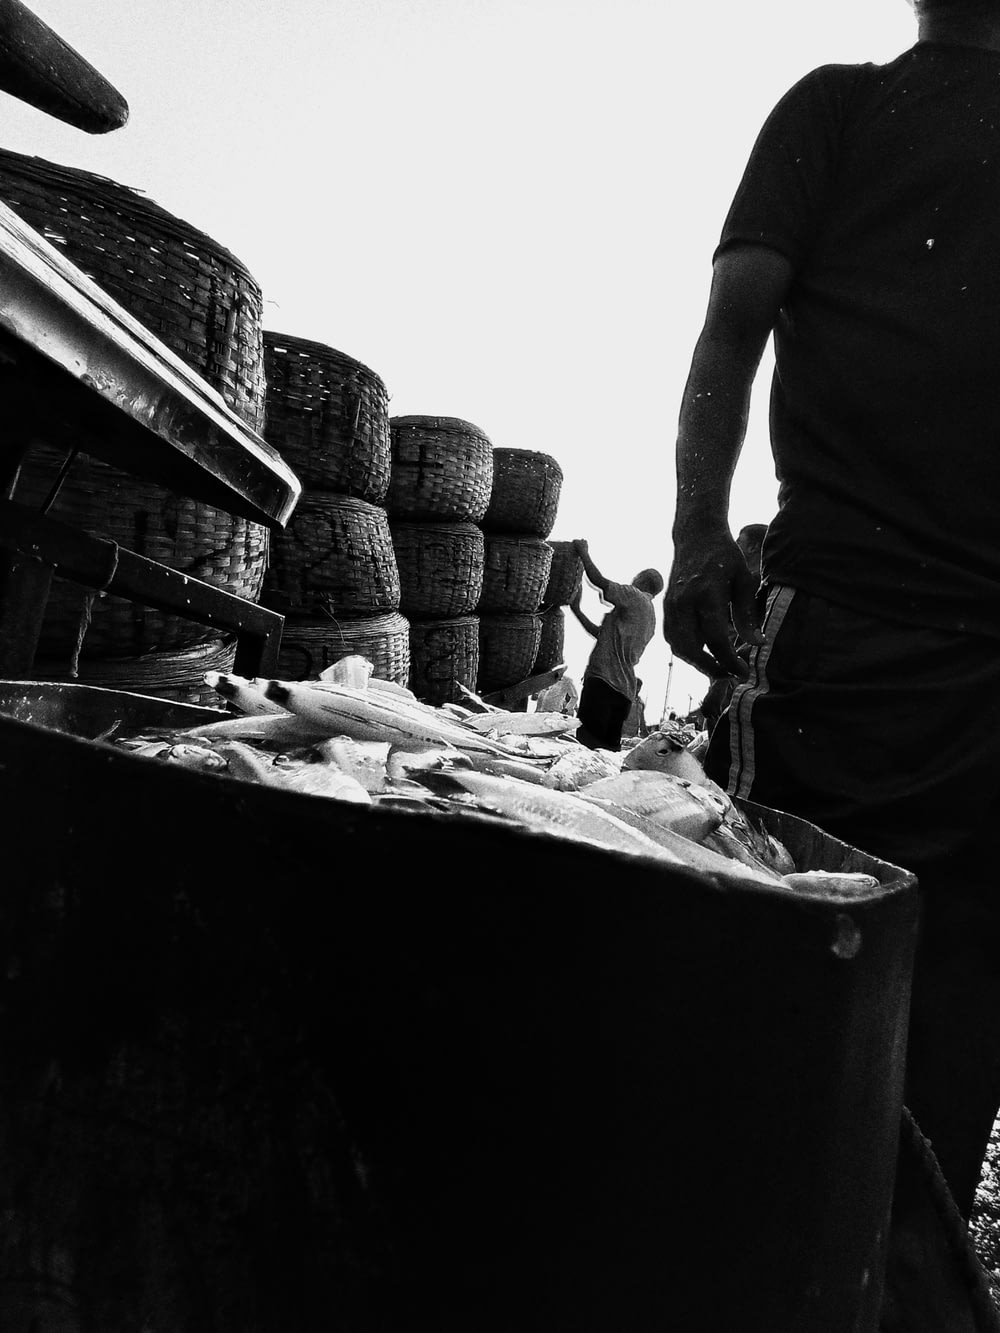 a black and white photo of a man standing next to a bin full of tires